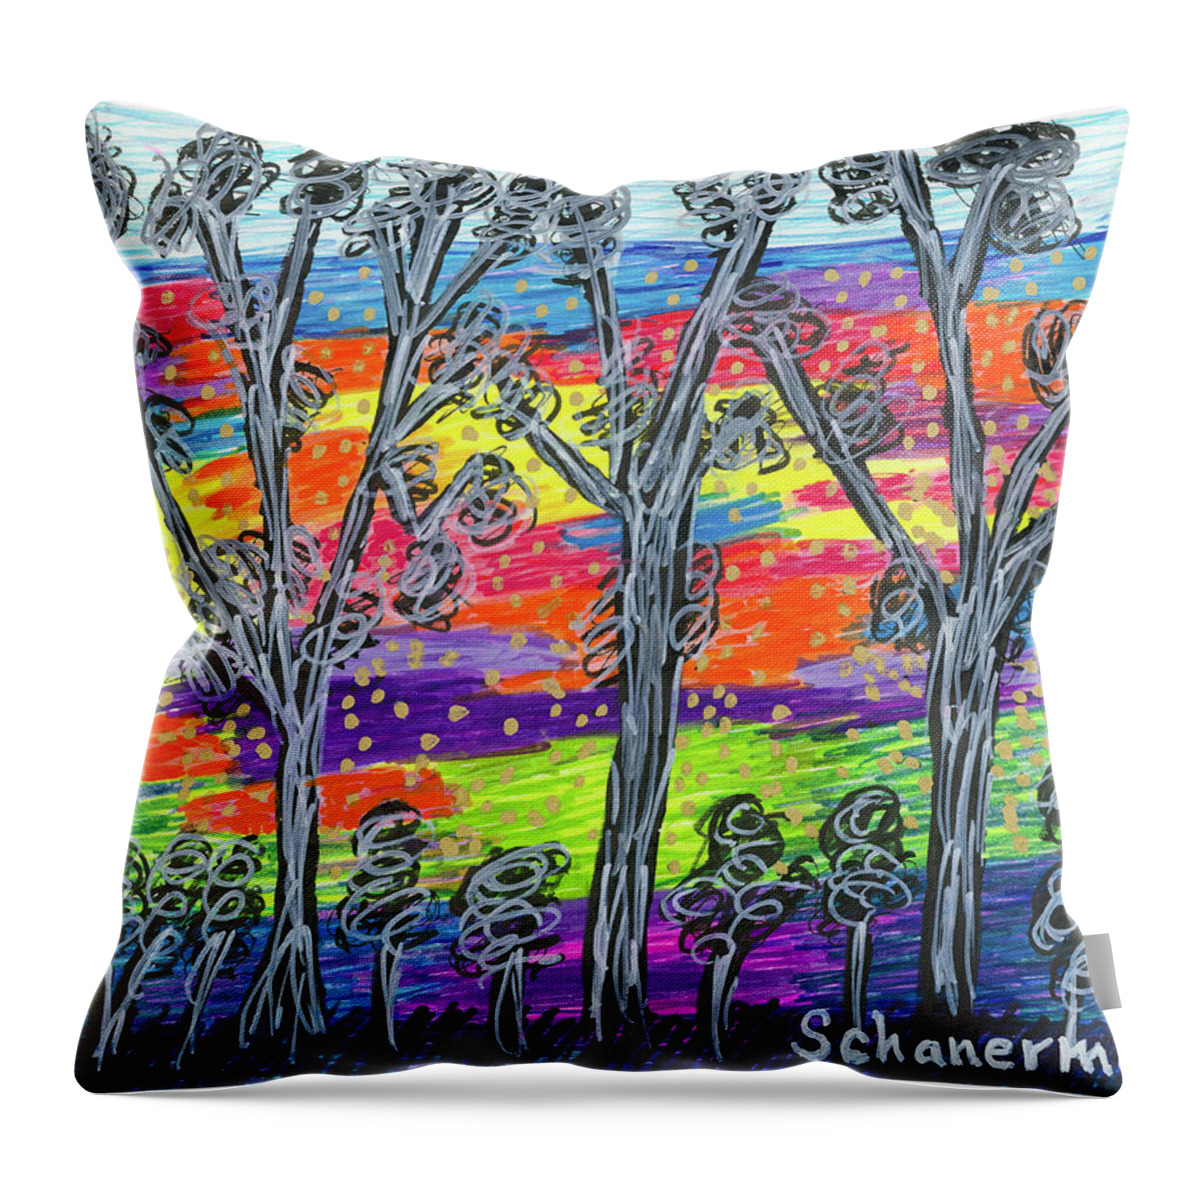 Original Drawing Throw Pillow featuring the drawing Rainbow Woods by Susan Schanerman